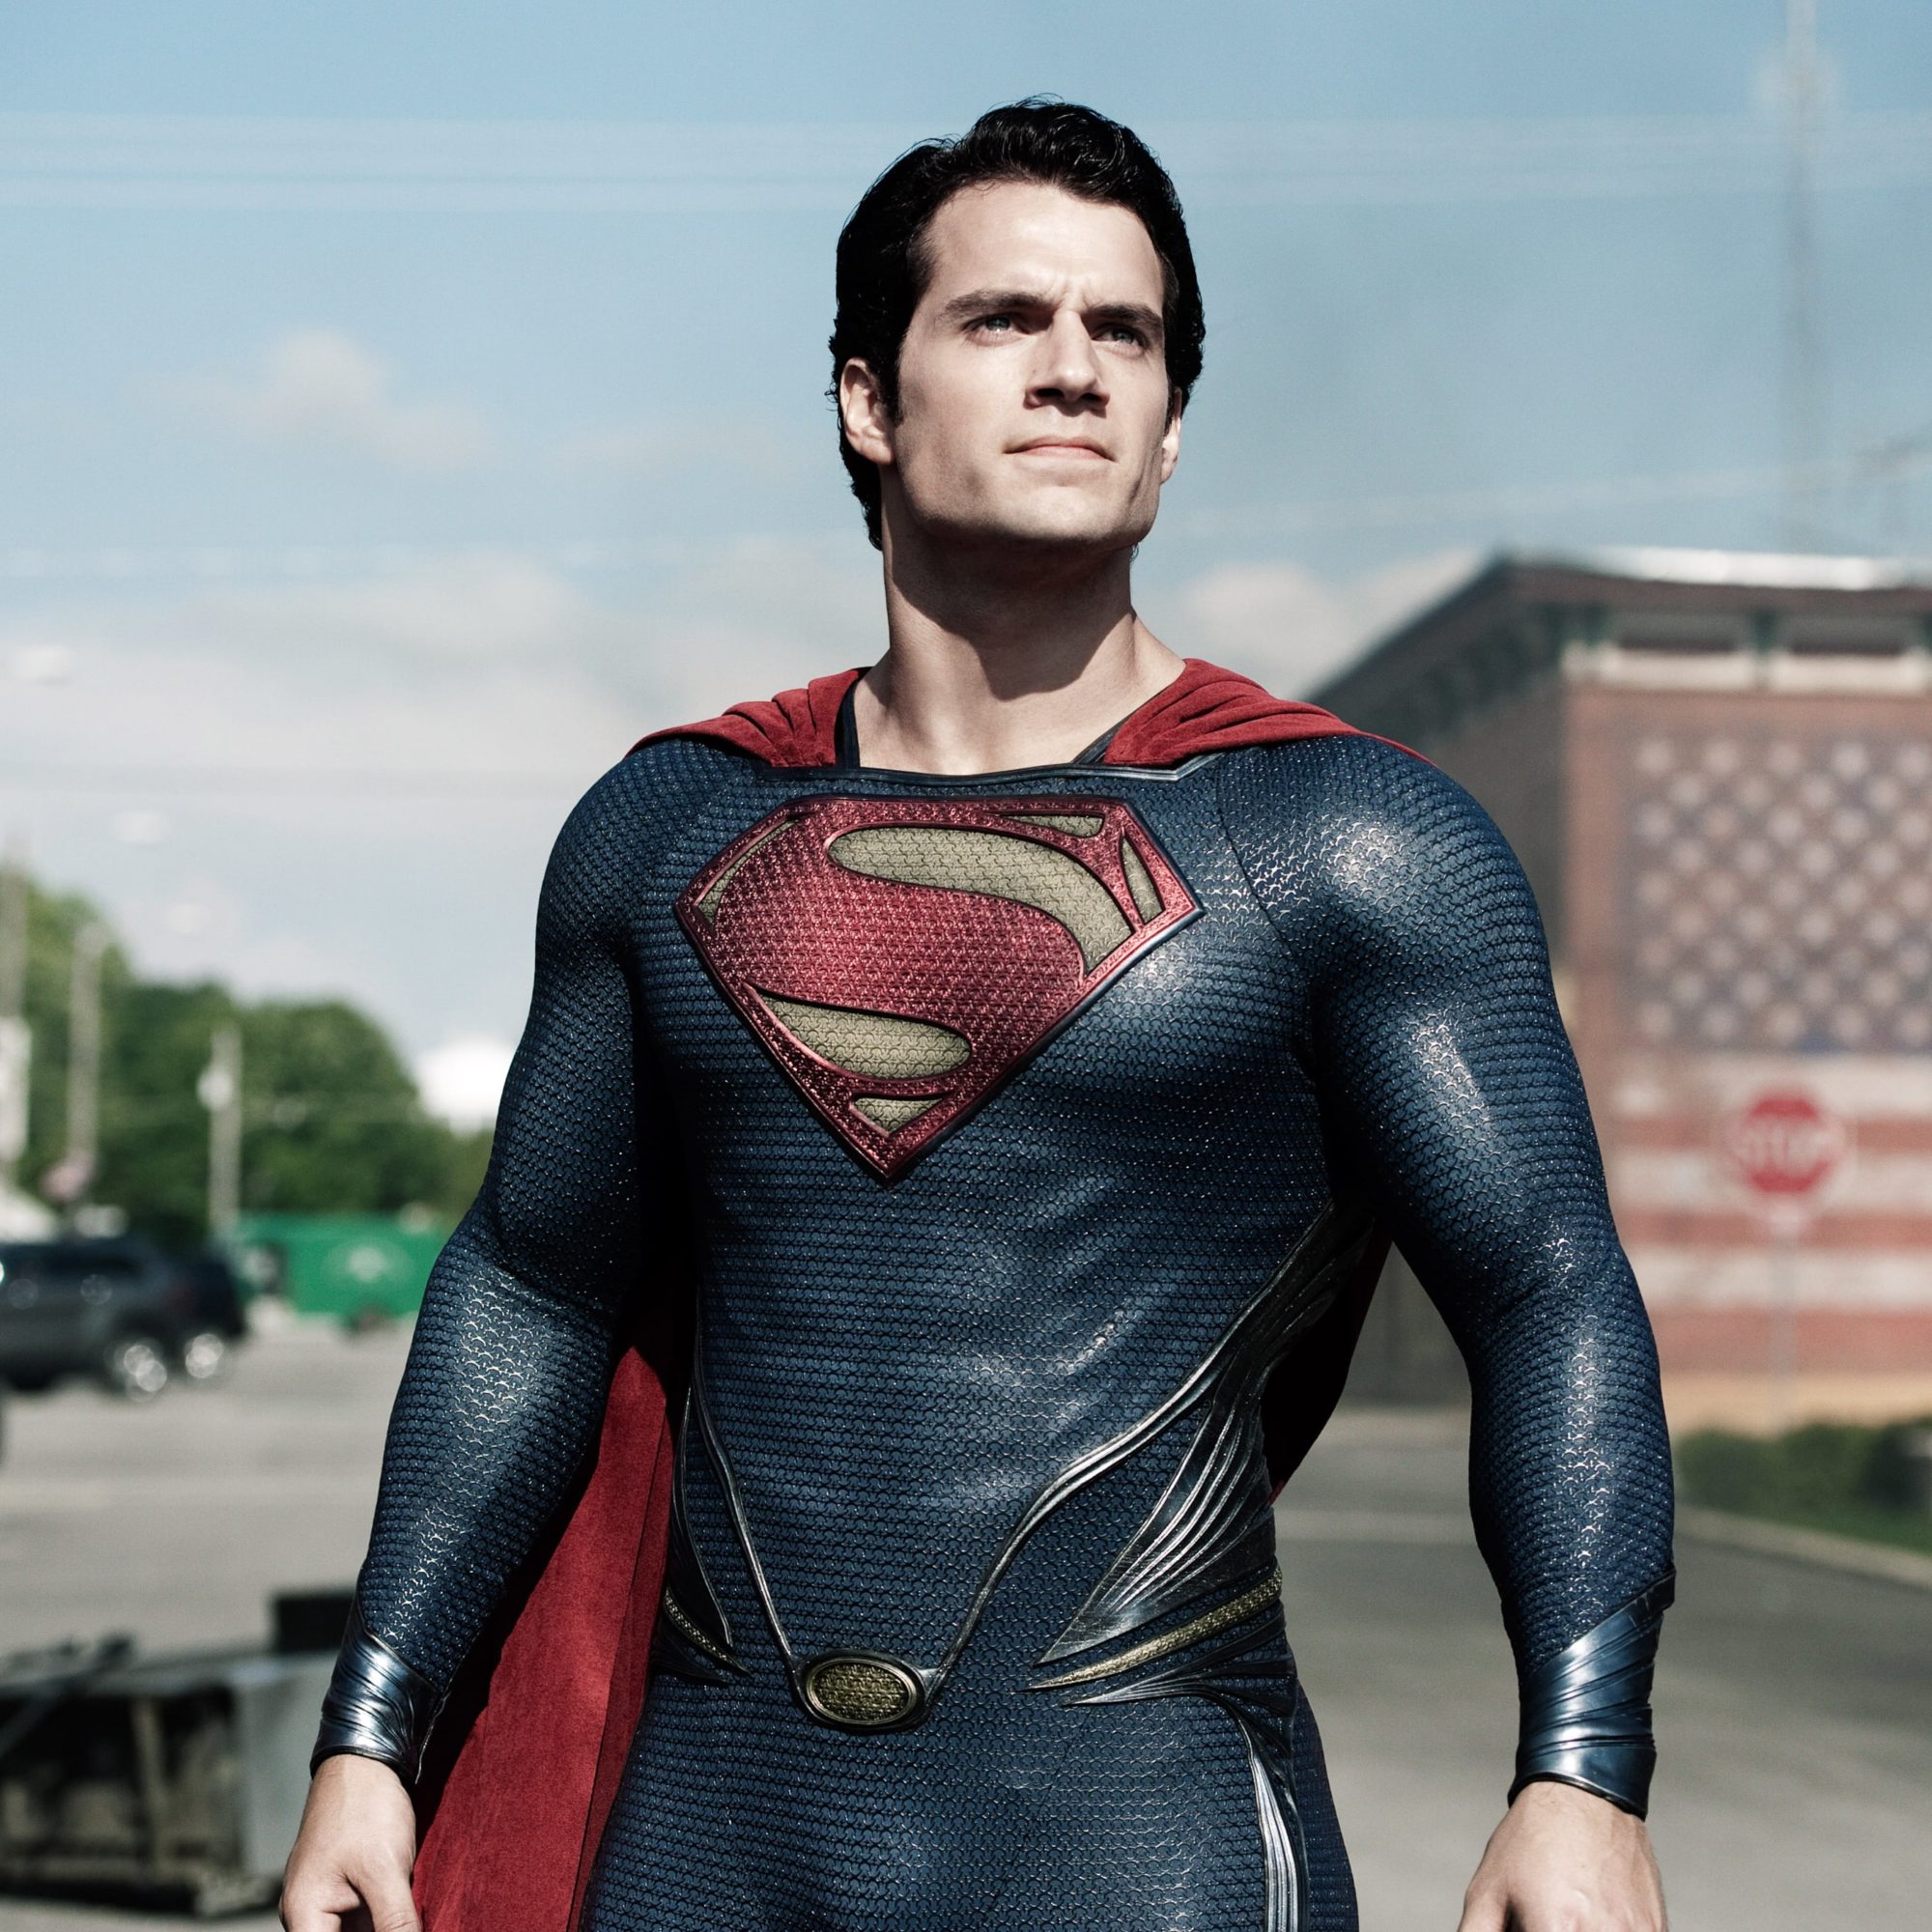 Henry Cavill Confirms He's Returning as Superman After "Black Adam